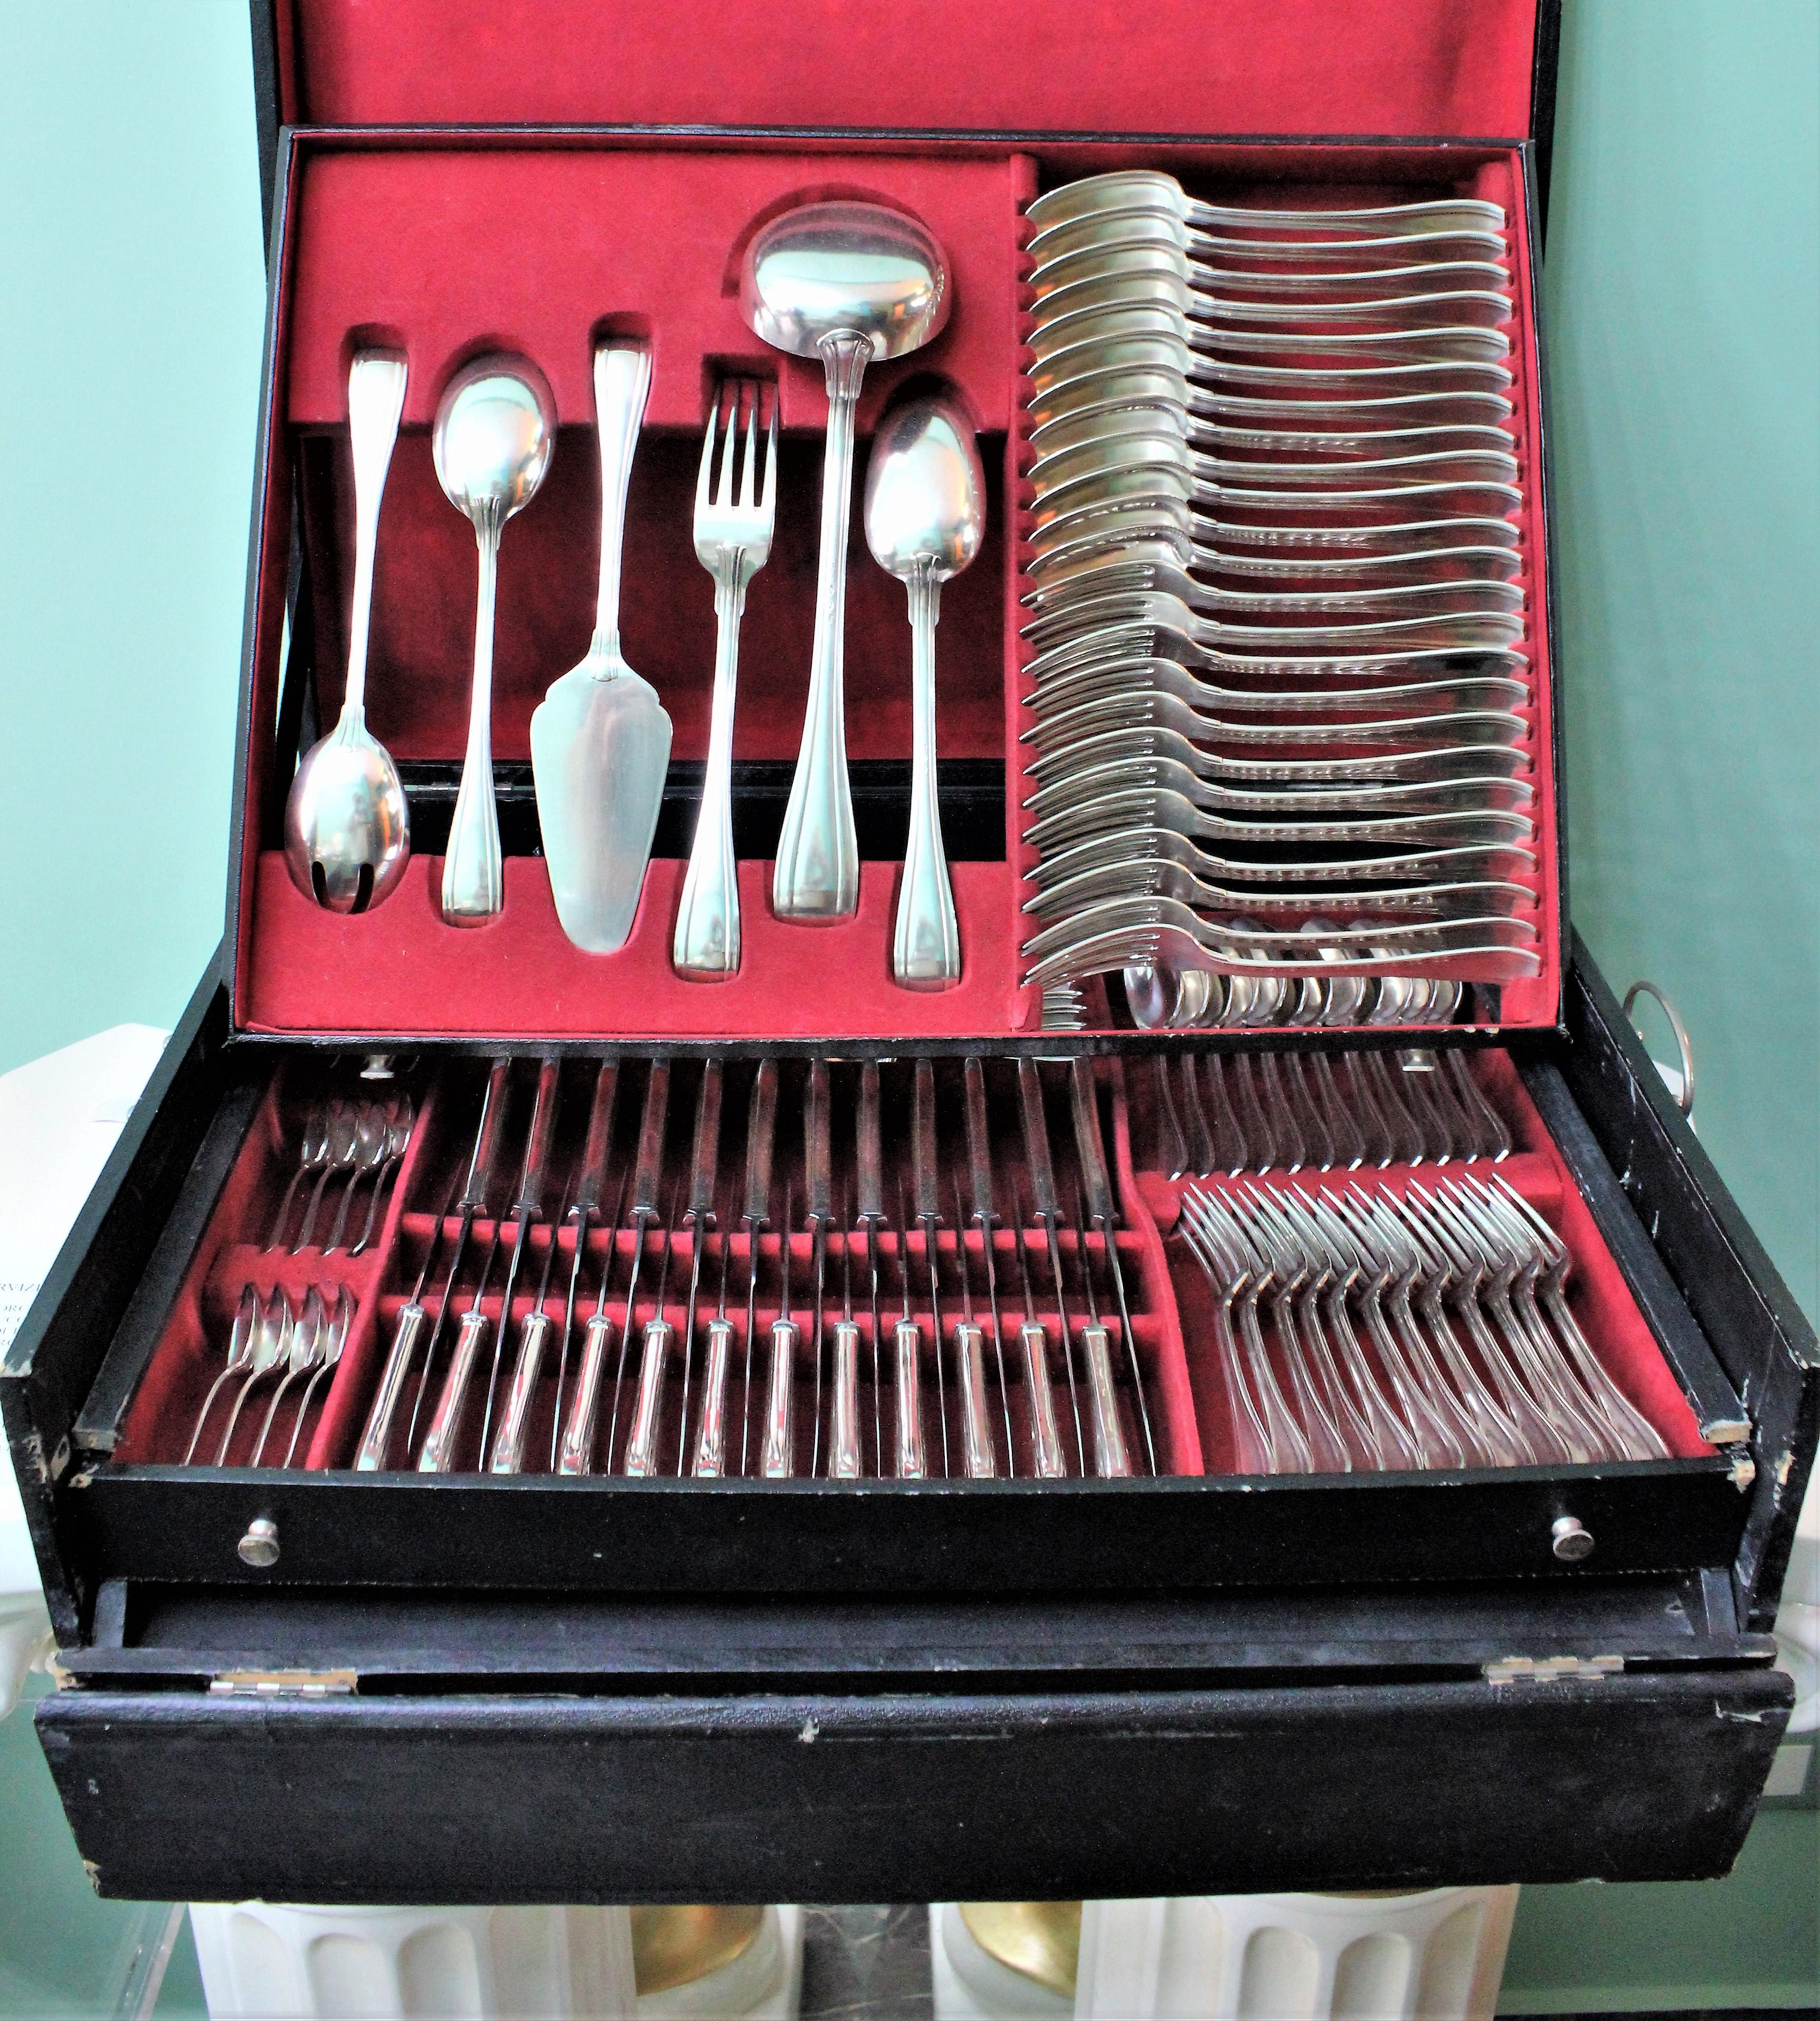 Beautiful Art Deco tableware silver set realized between 1934 and 1944 by the famous Ricci Argenteria from Alessandria, Italy.
Silver 800/1000 marks, maker marks and re-seller marks.
The re-seller was Miracoli in Milan, another prestigious silver